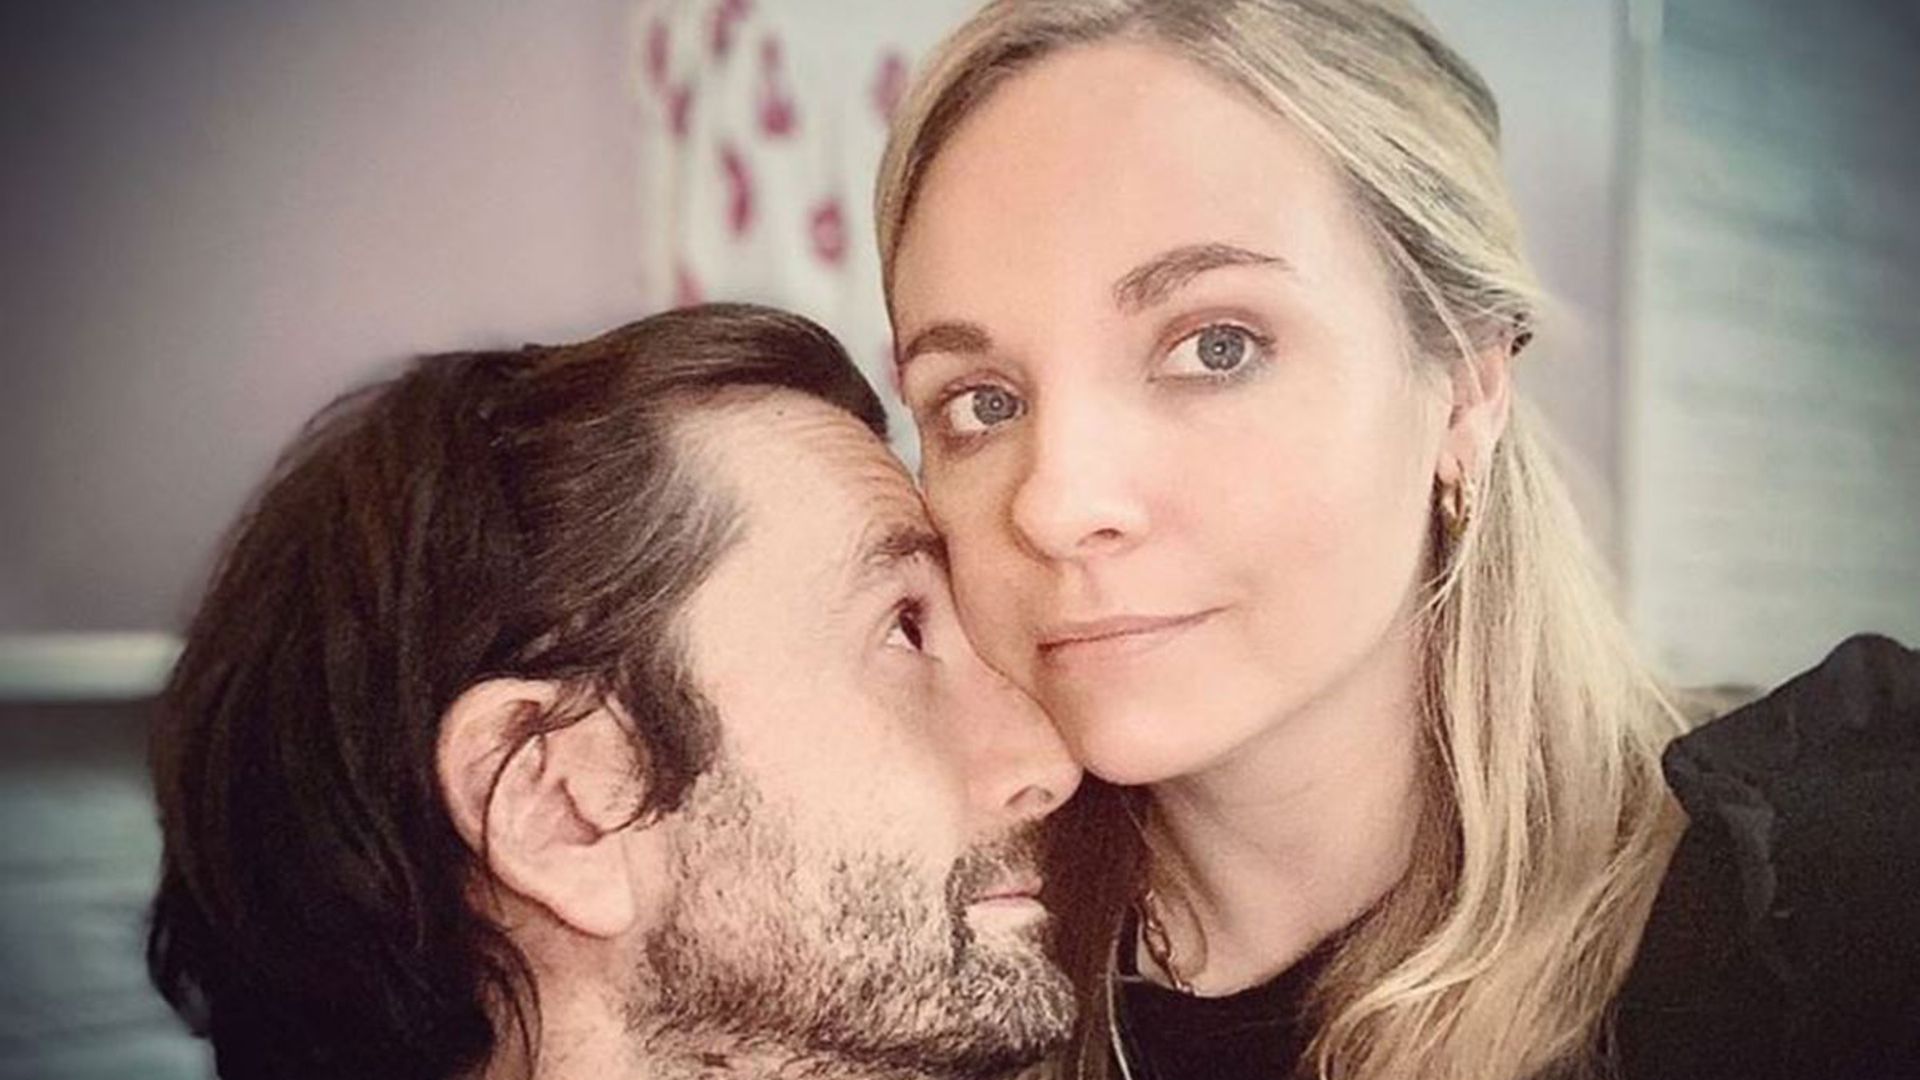 Georgia Tennant bakes incredible dessert for husband David - and fans can't believe their eyes